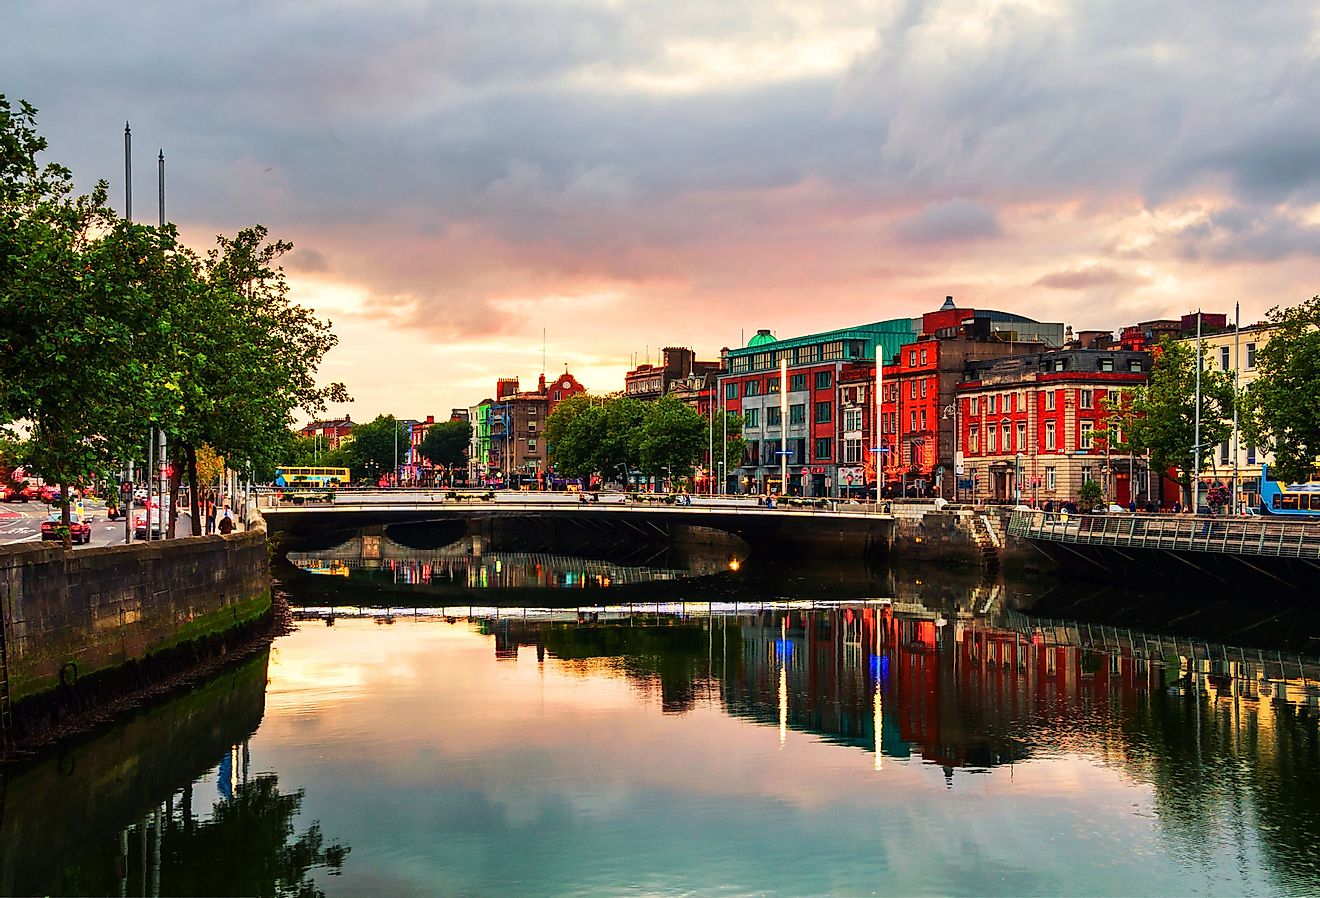 Embankment of Liffey River in Dublin, Ireland. Sunset view with buildings and city lights at the background. Image credit Madrugada Verde via Shutterstock.